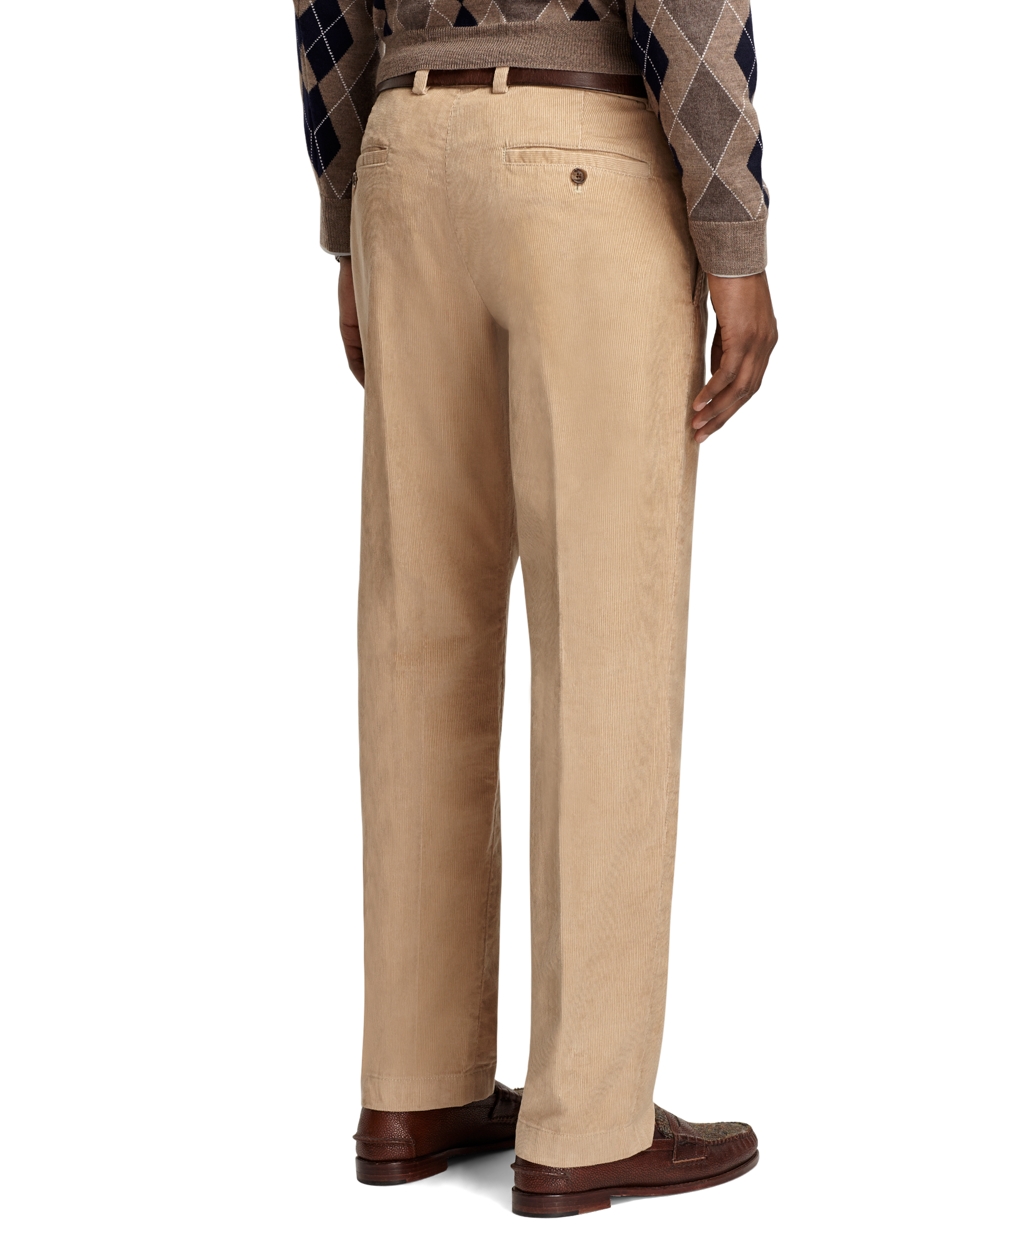 Lyst - Brooks Brothers Milano 14wale Corduroy Pants in Brown for Men